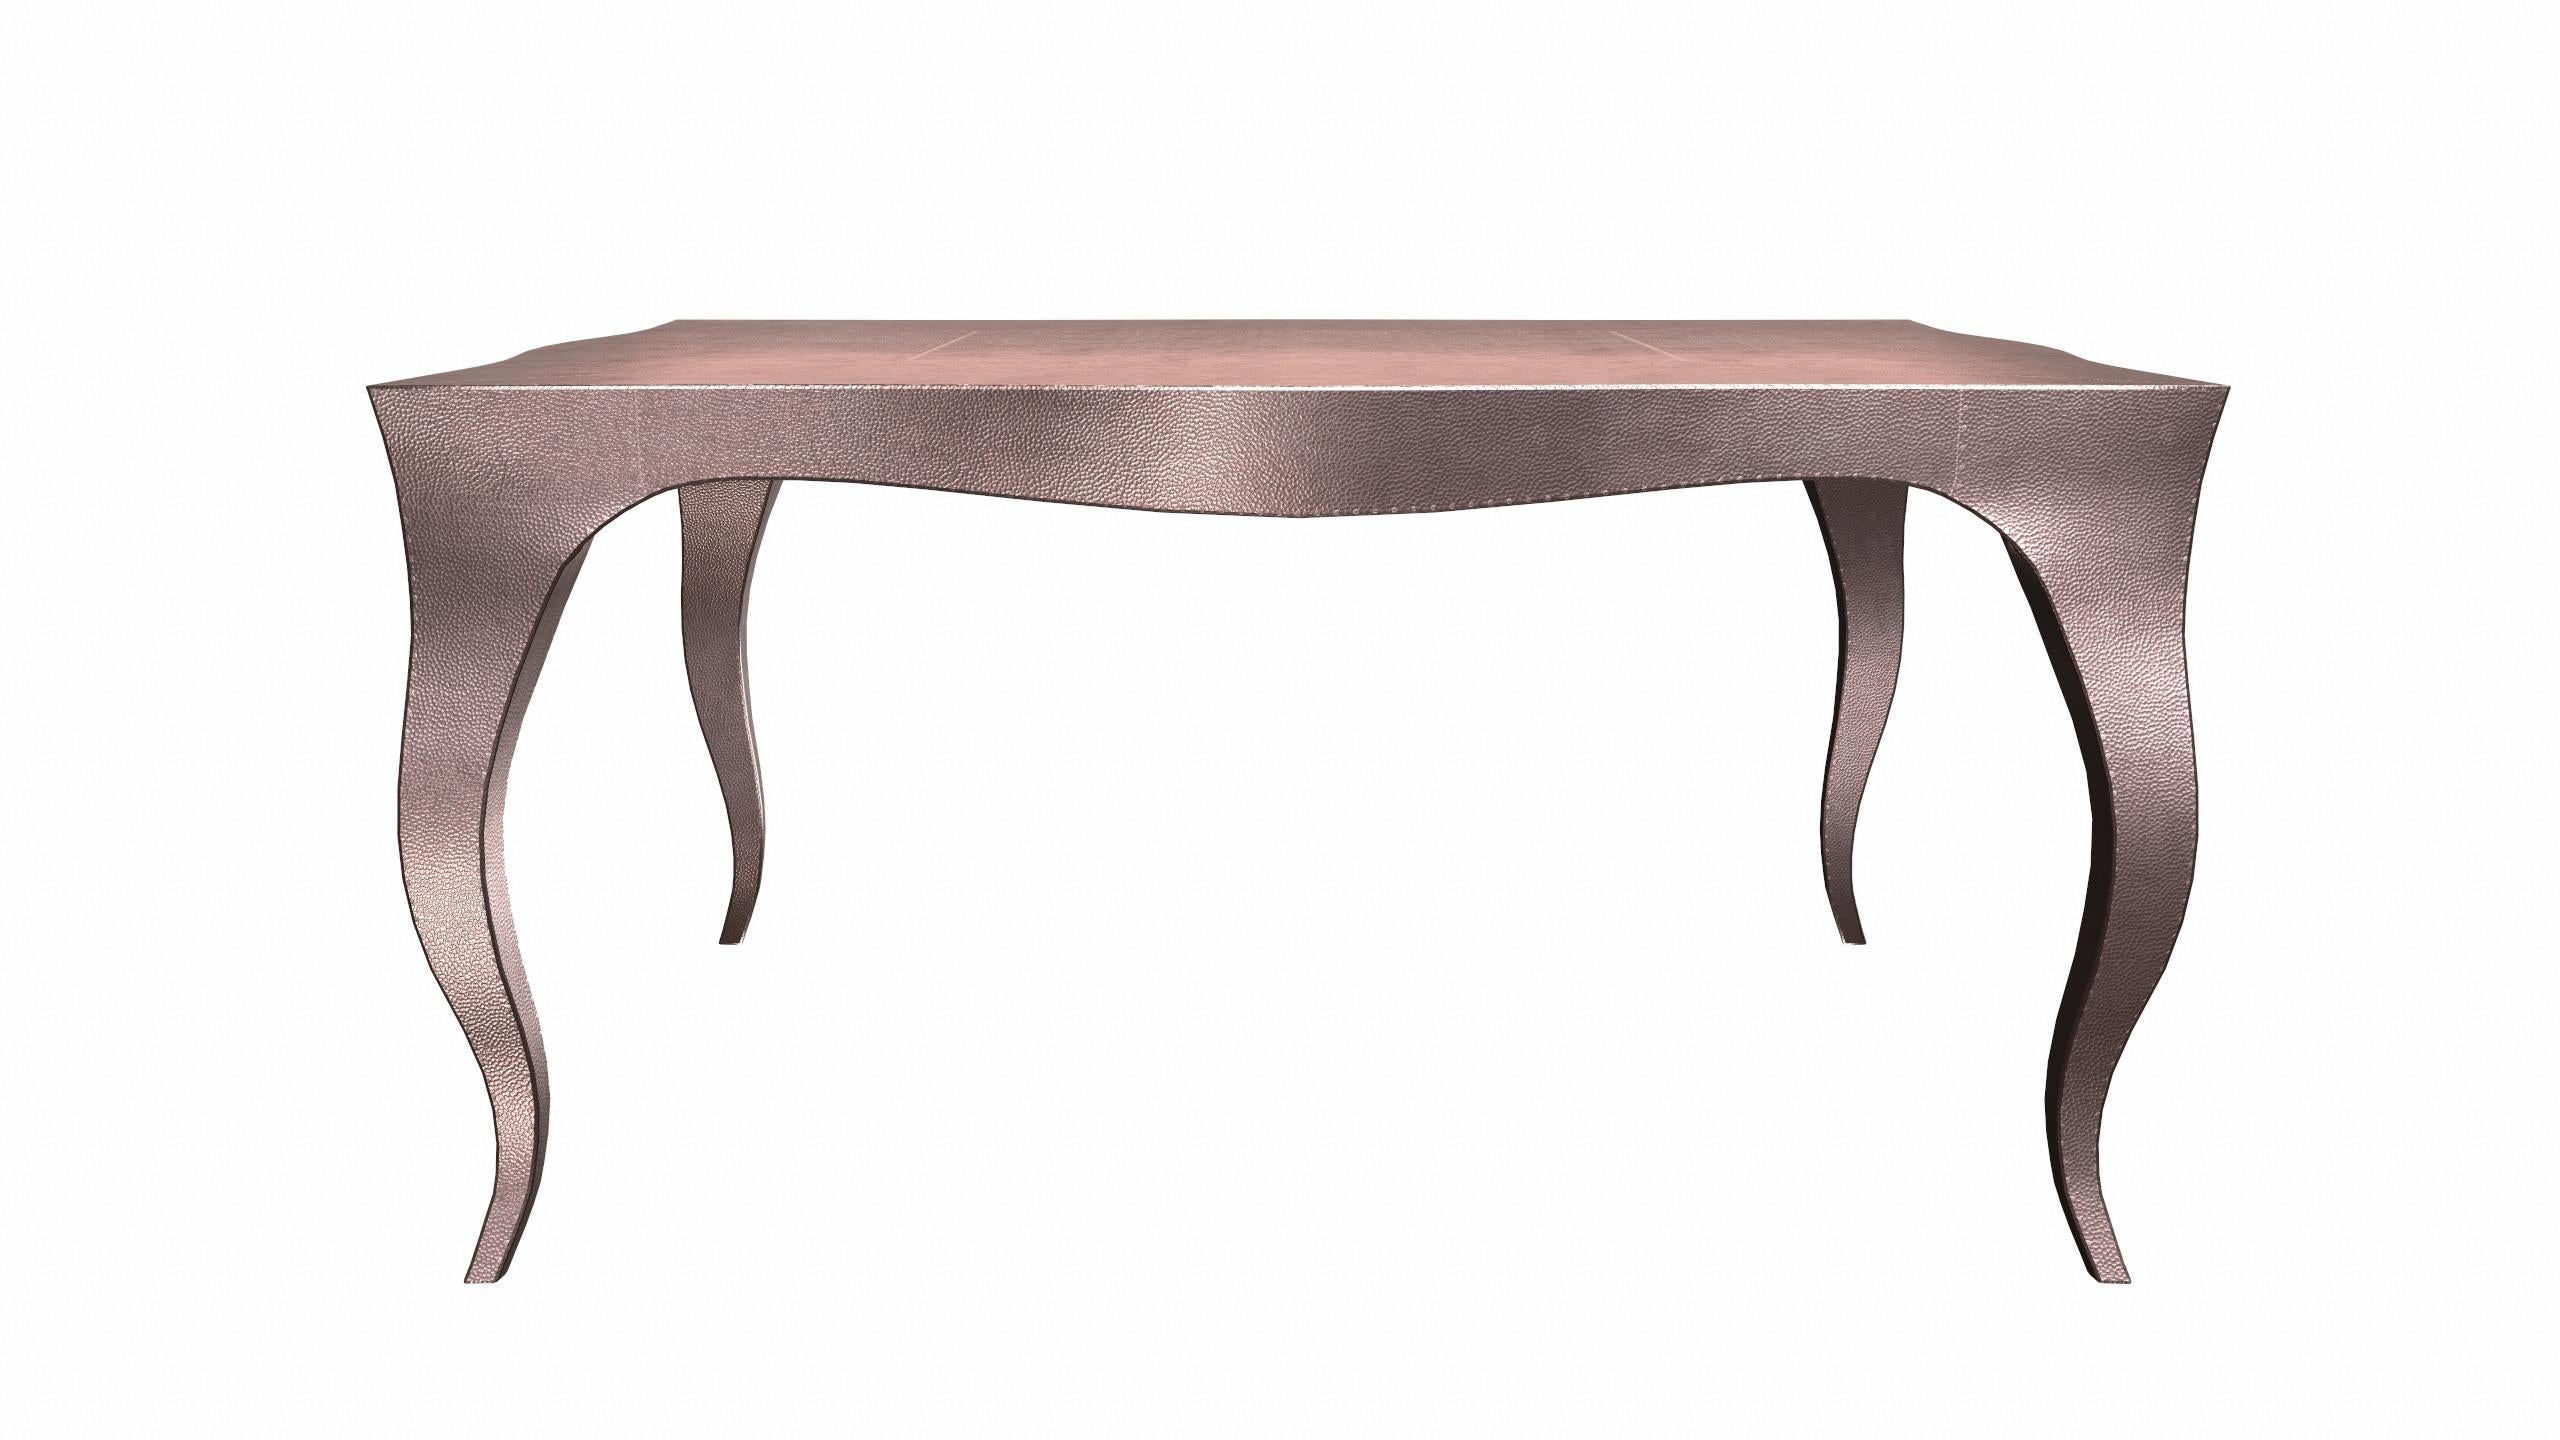 American Louise Art Deco Center Tables Mid. Hammered Copper 18.5x18.5x10 inch  For Sale